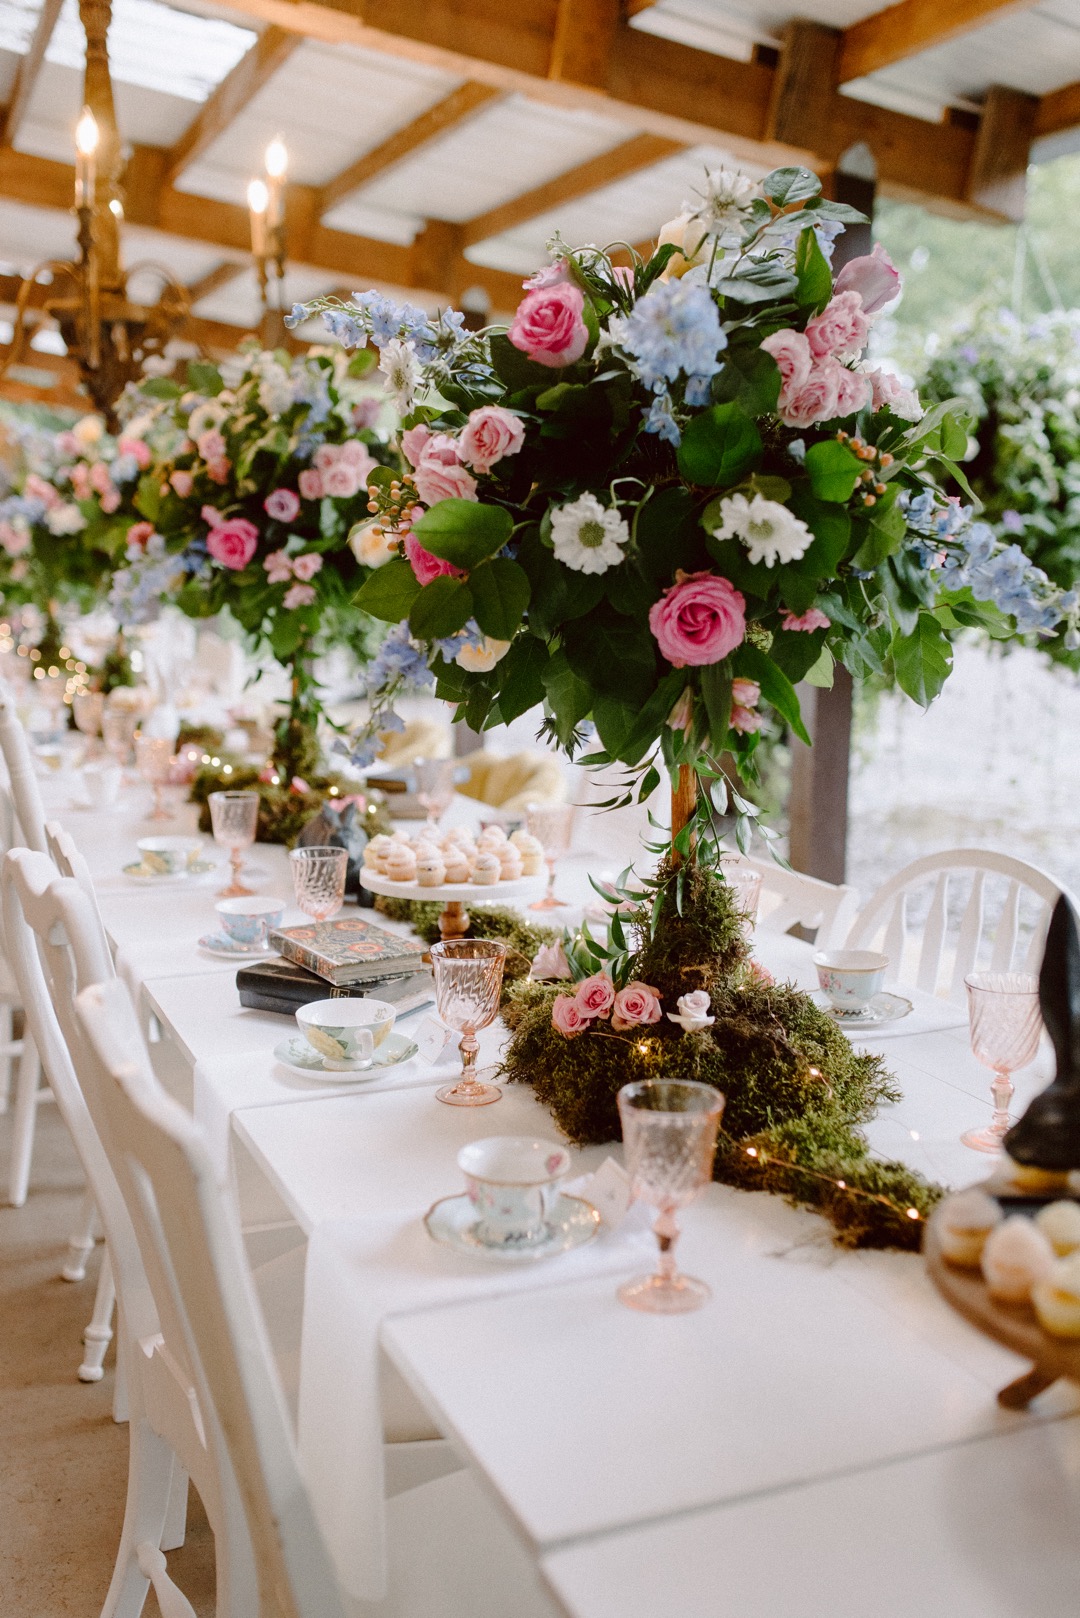 Florals and table settings at a wedding